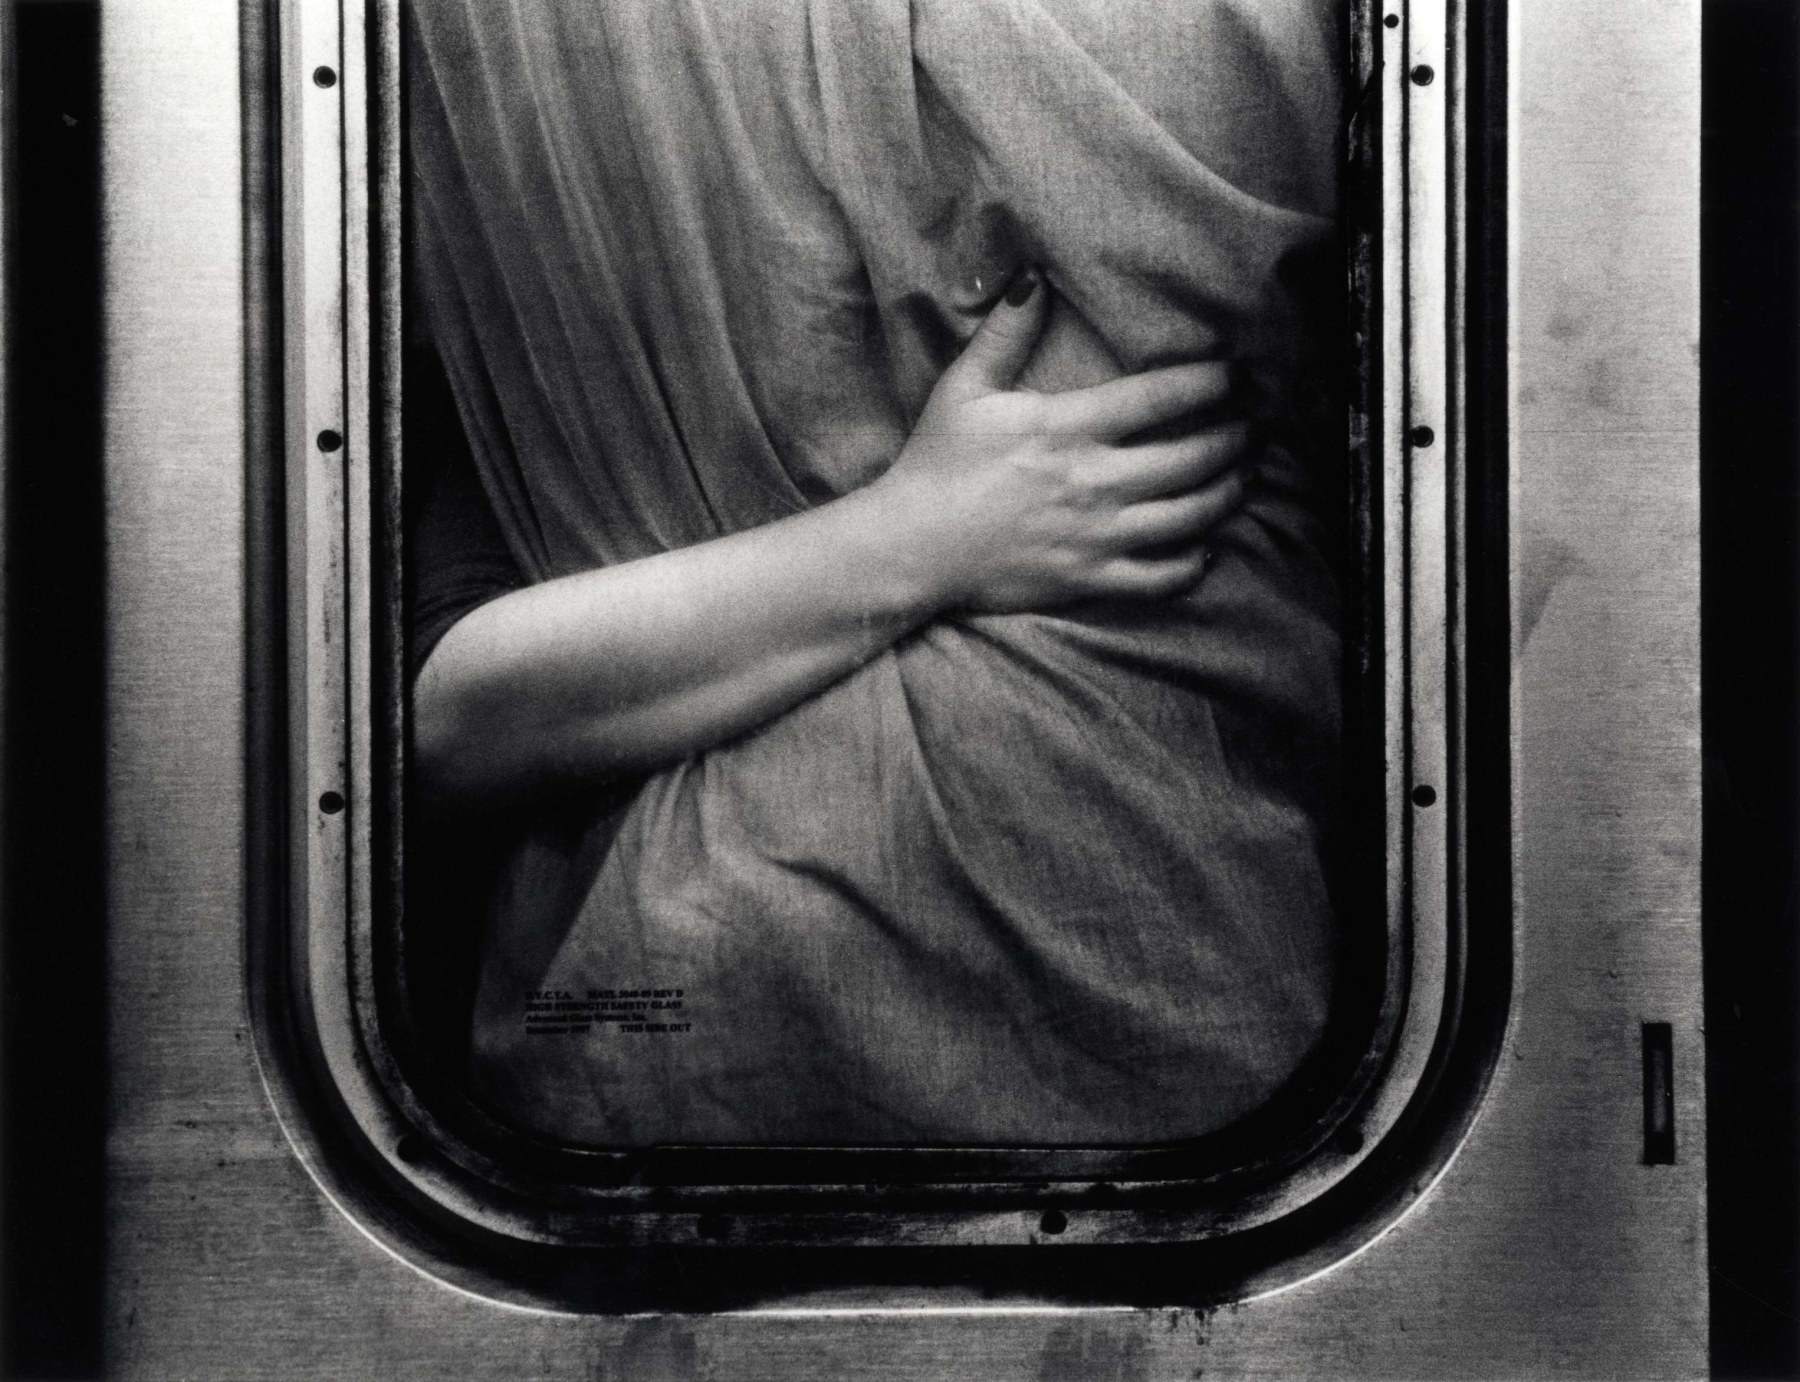 Kazuo Sumida A Story of the NYC Subway, W 28th St, 2002